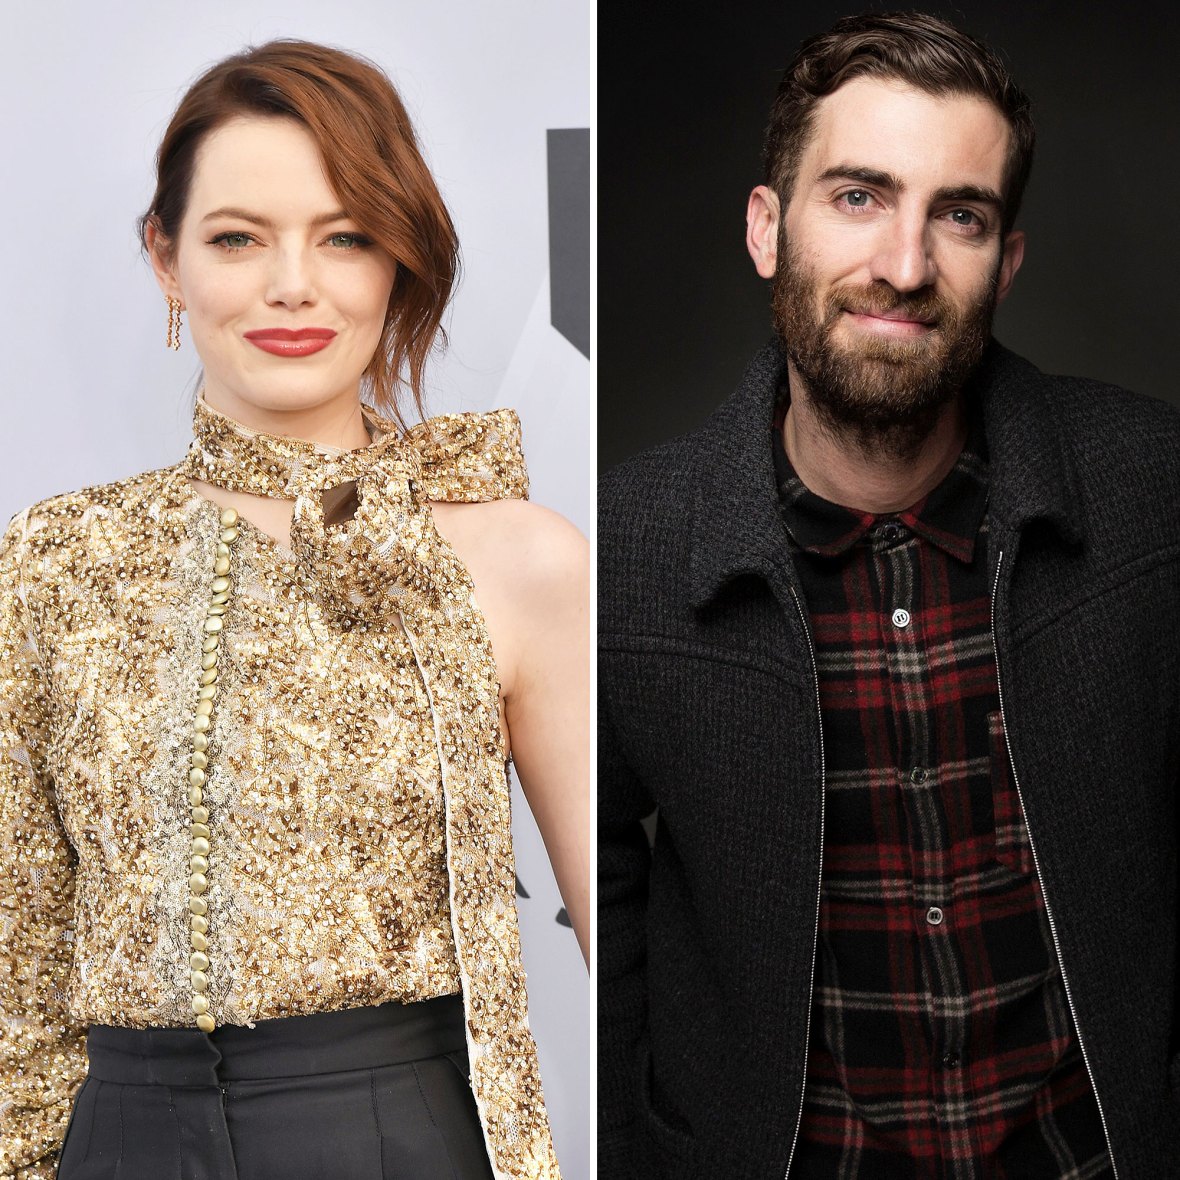 Emma Stone Is Pregnant and Expecting Her First Child With Dave McCary